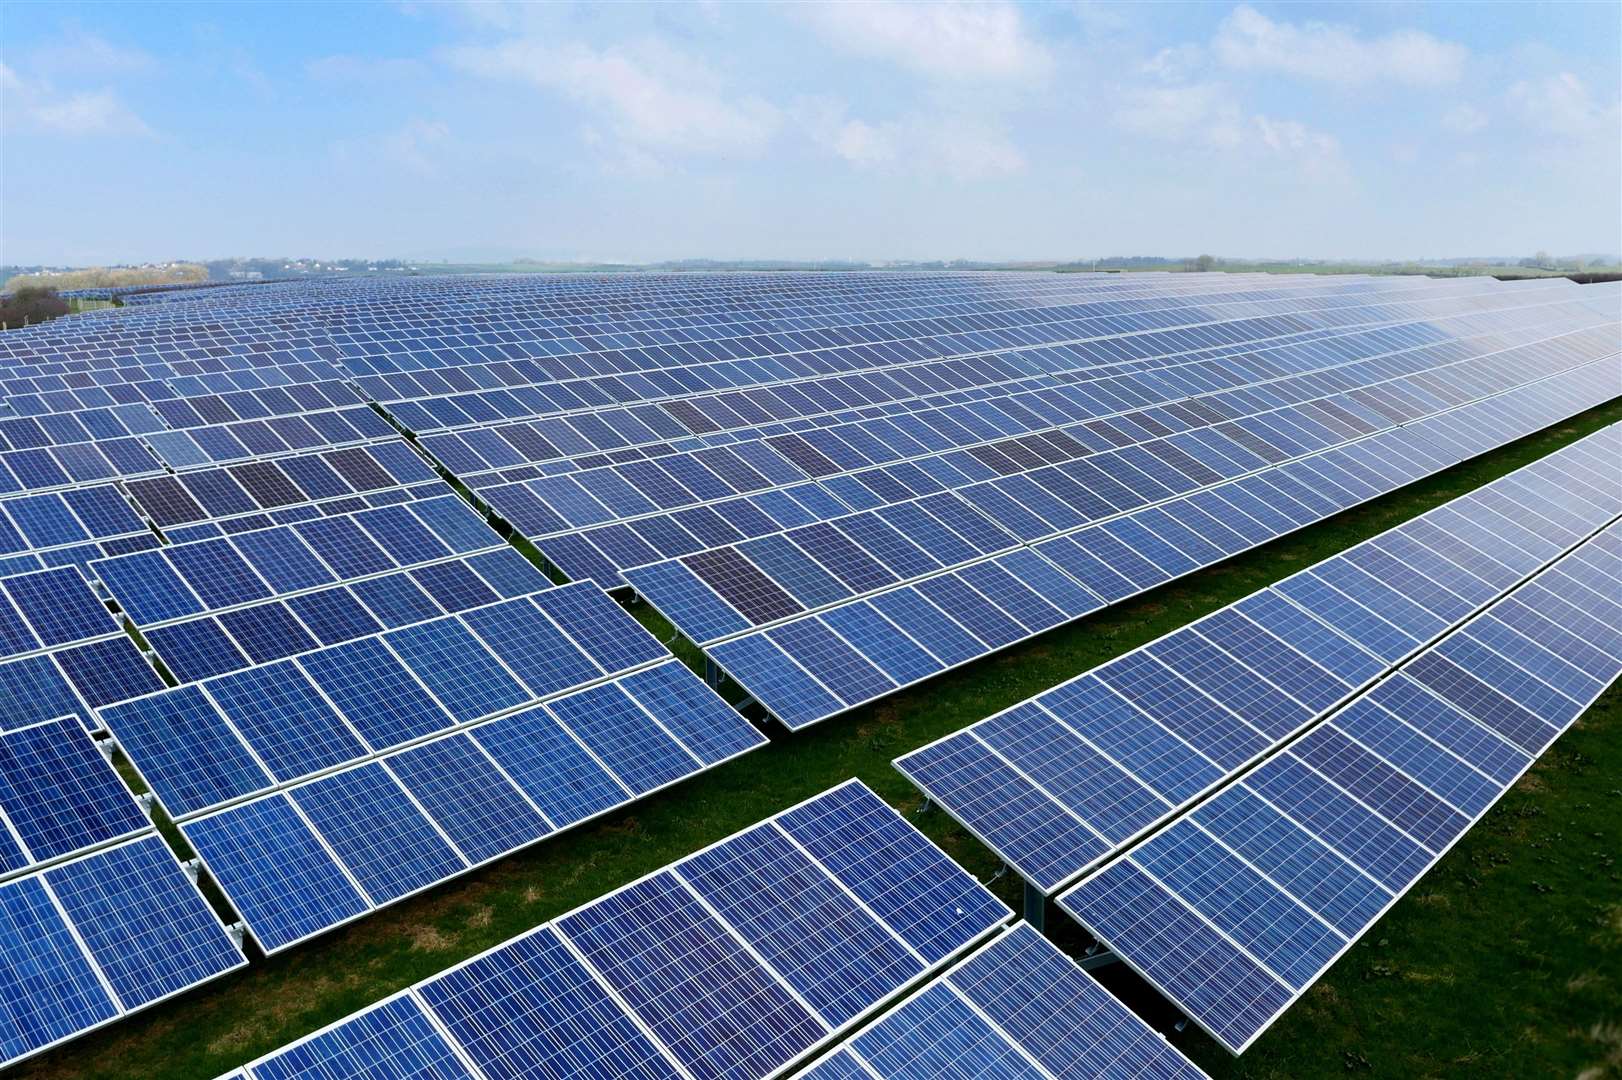 Police are investigating reports of a burglary at a solar farm in Faversham